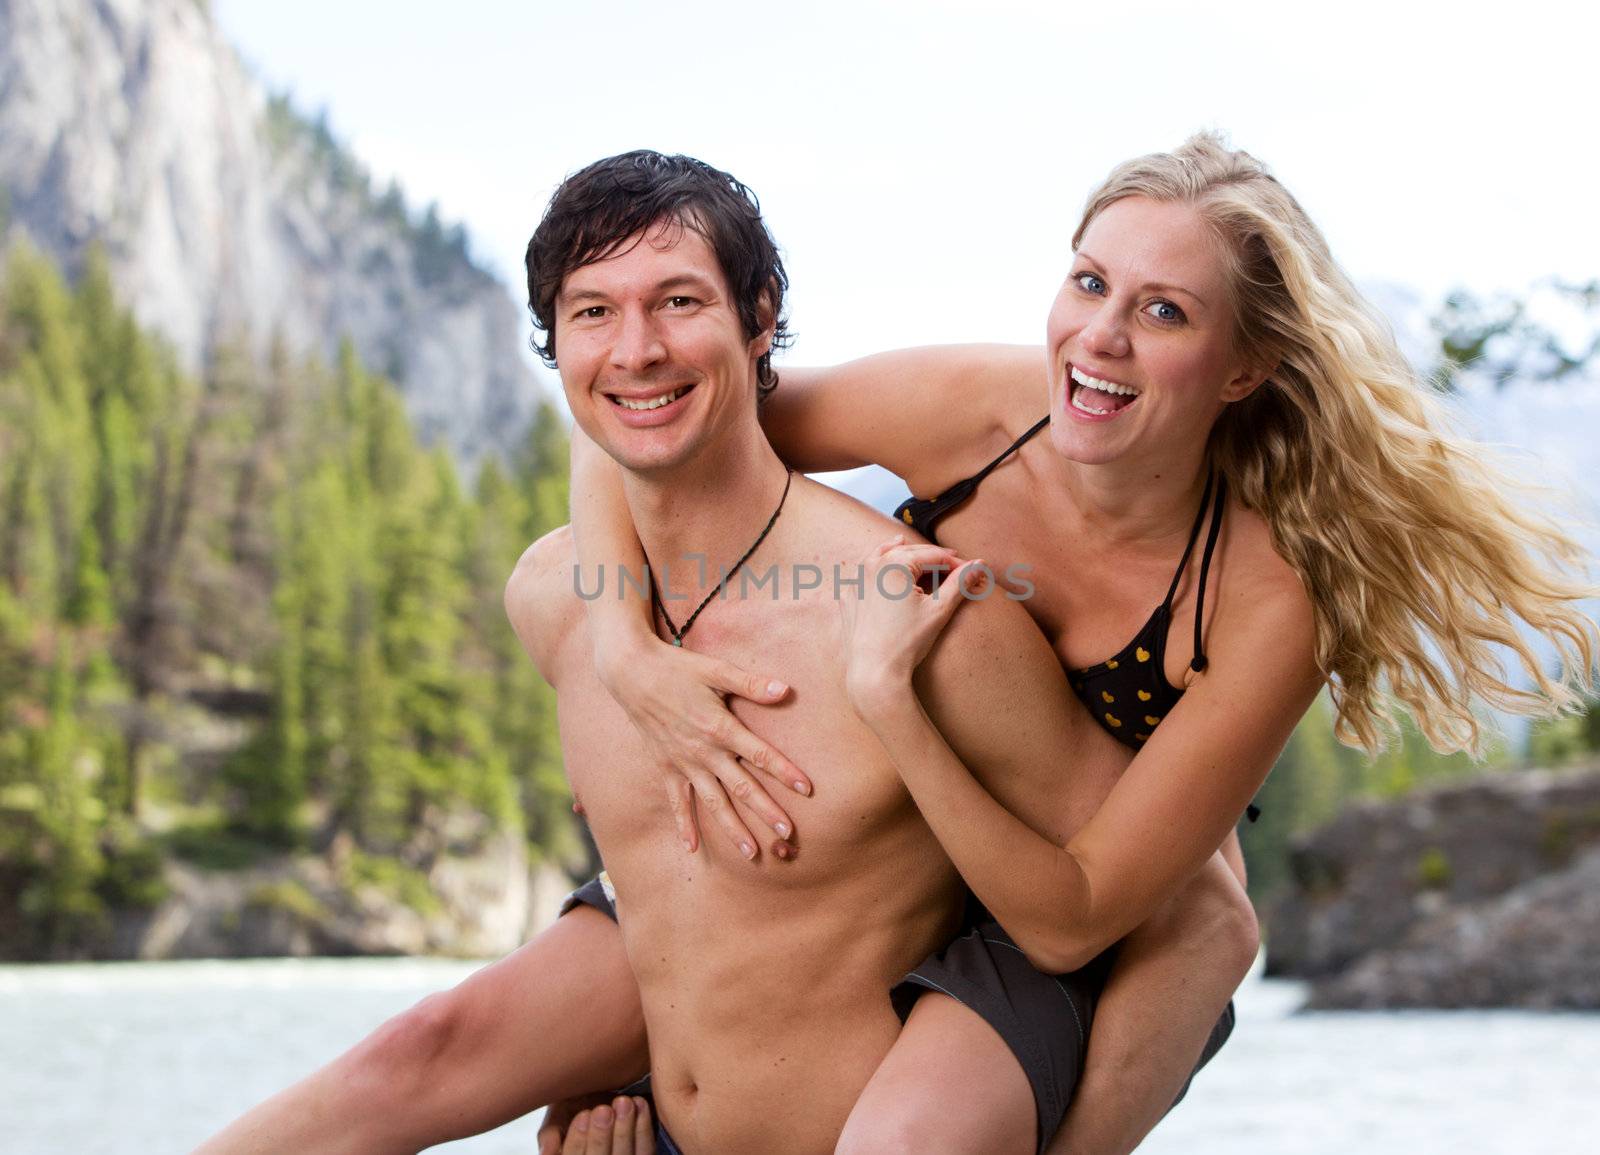 A playing couple at a scenic location in Banff